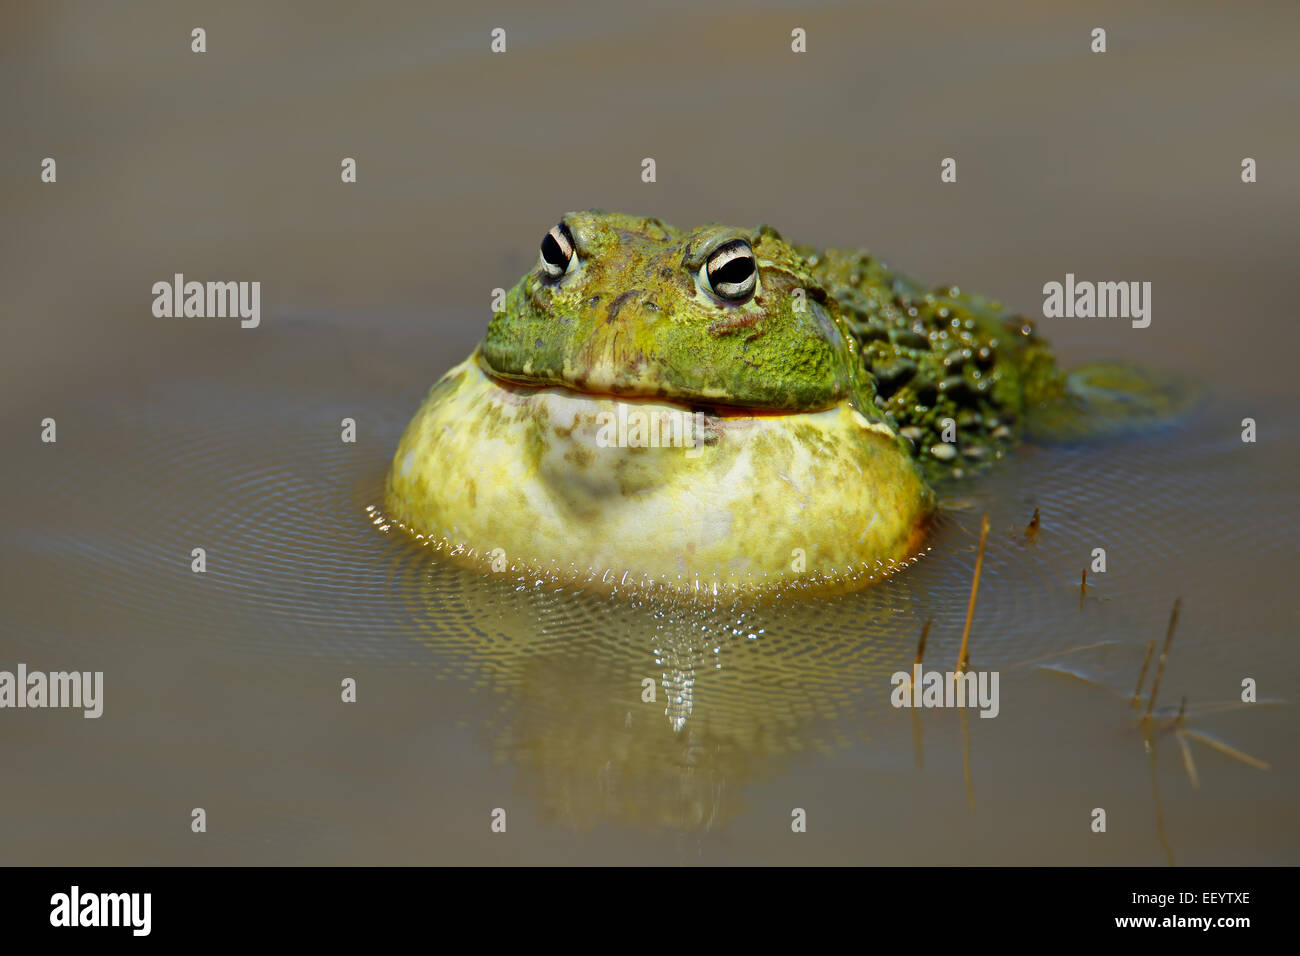 Male African giant bullfrog (Pyxicephalus adspersus) calling, South Africa Stock Photo